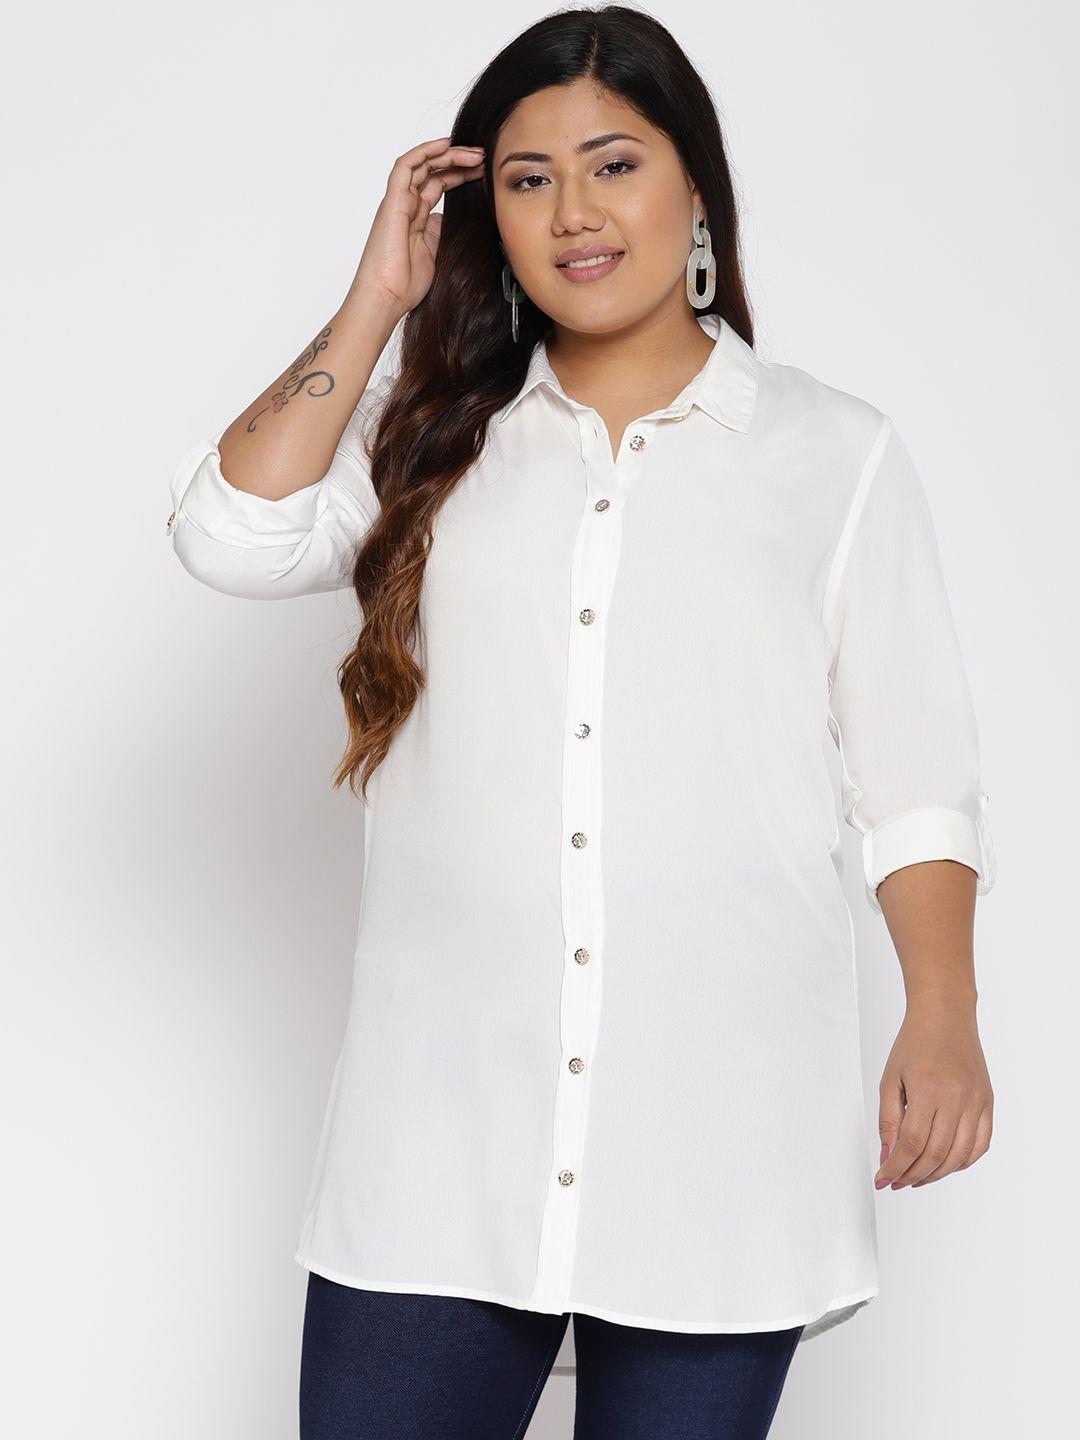 the-pink-moon-plus-size-women-off-white-regular-fit-solid-casual-shirt